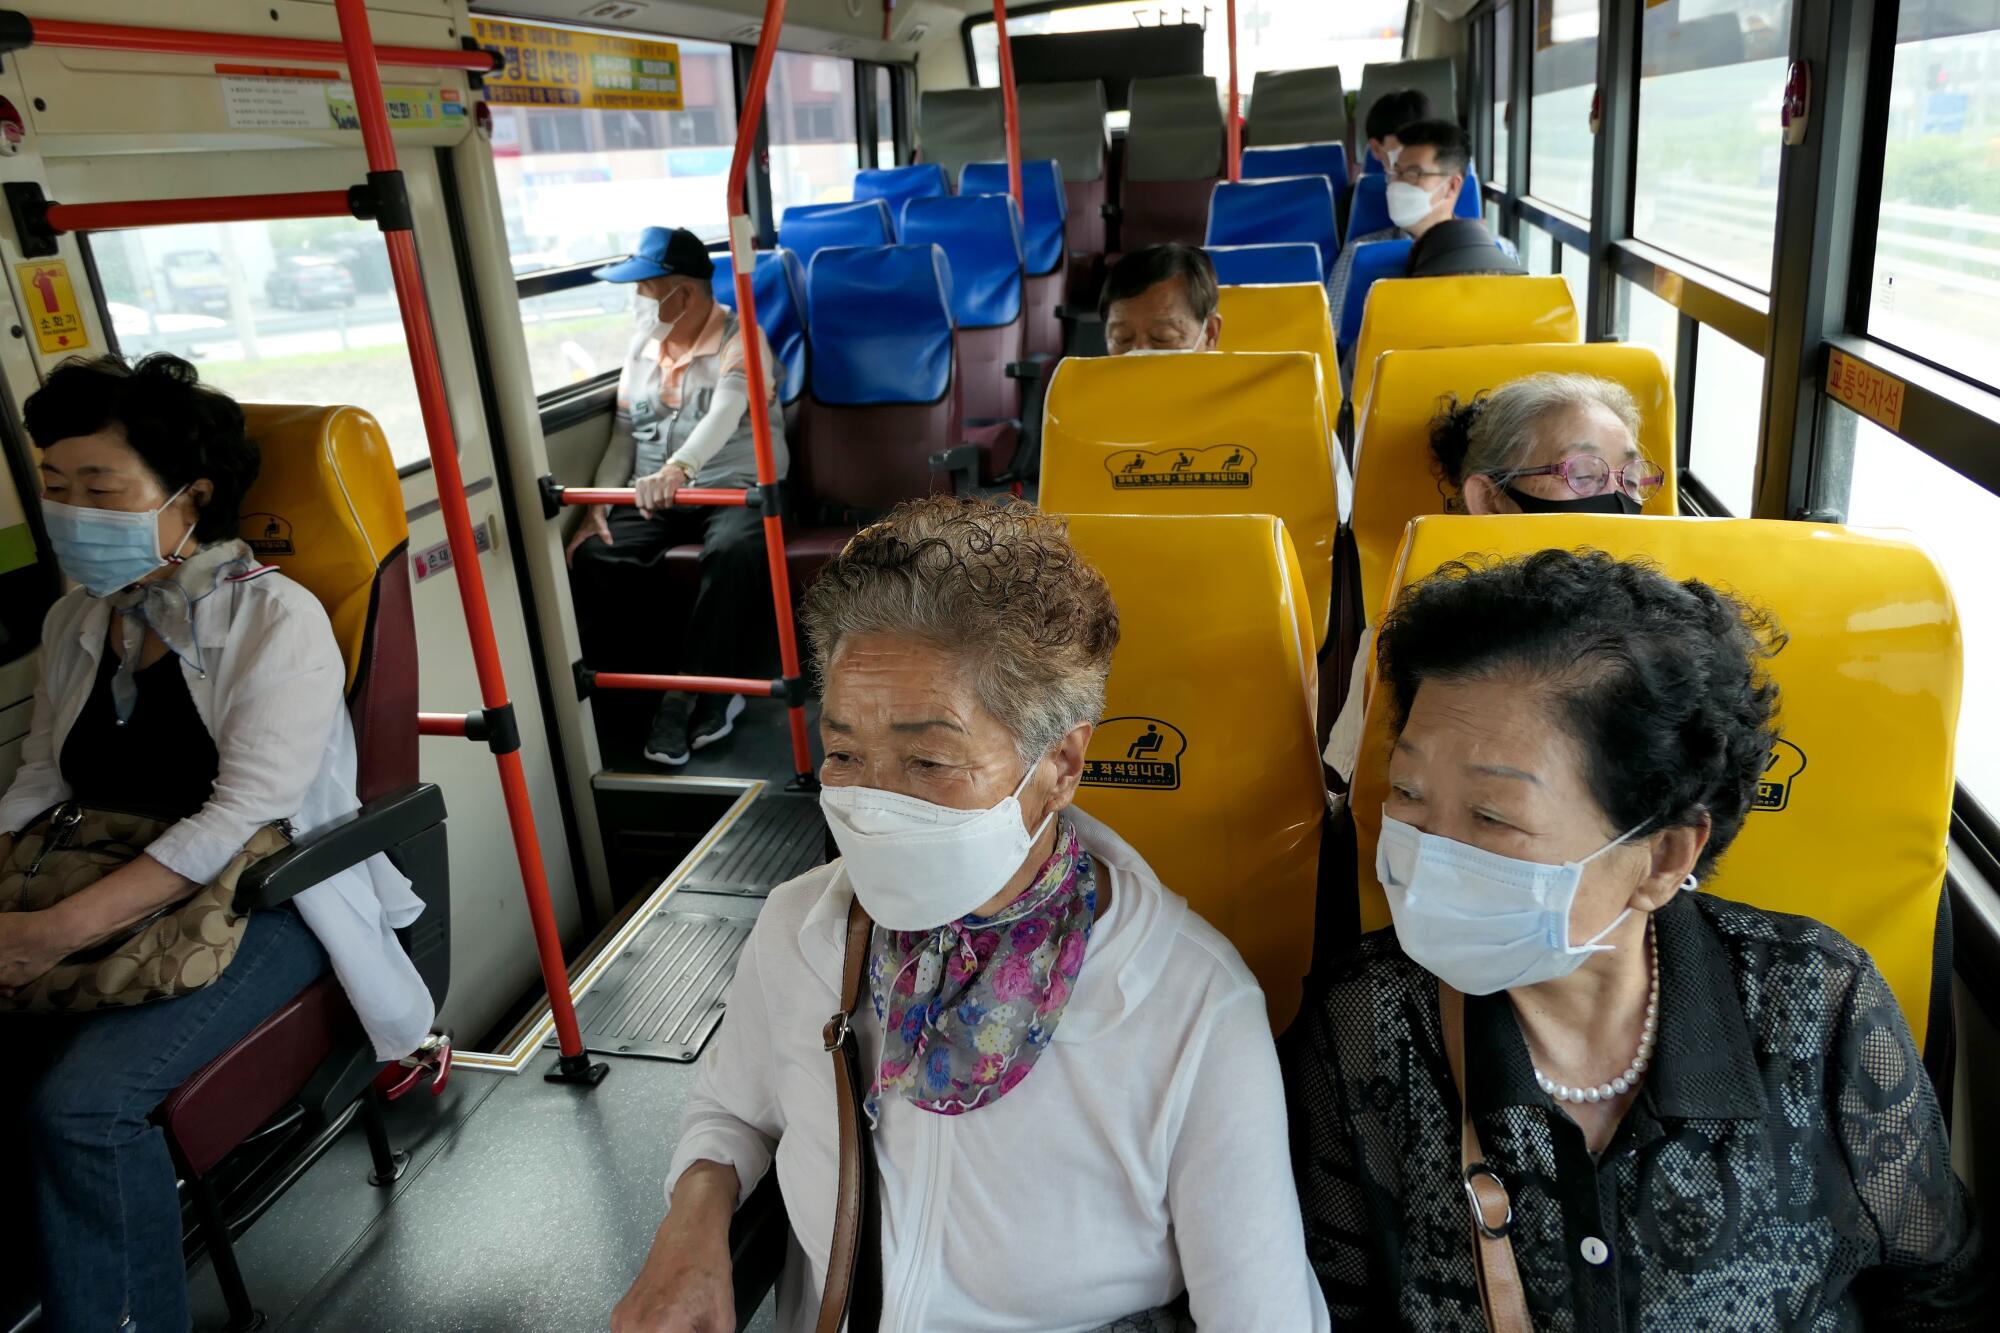 Older people ride a bus with some empty seats